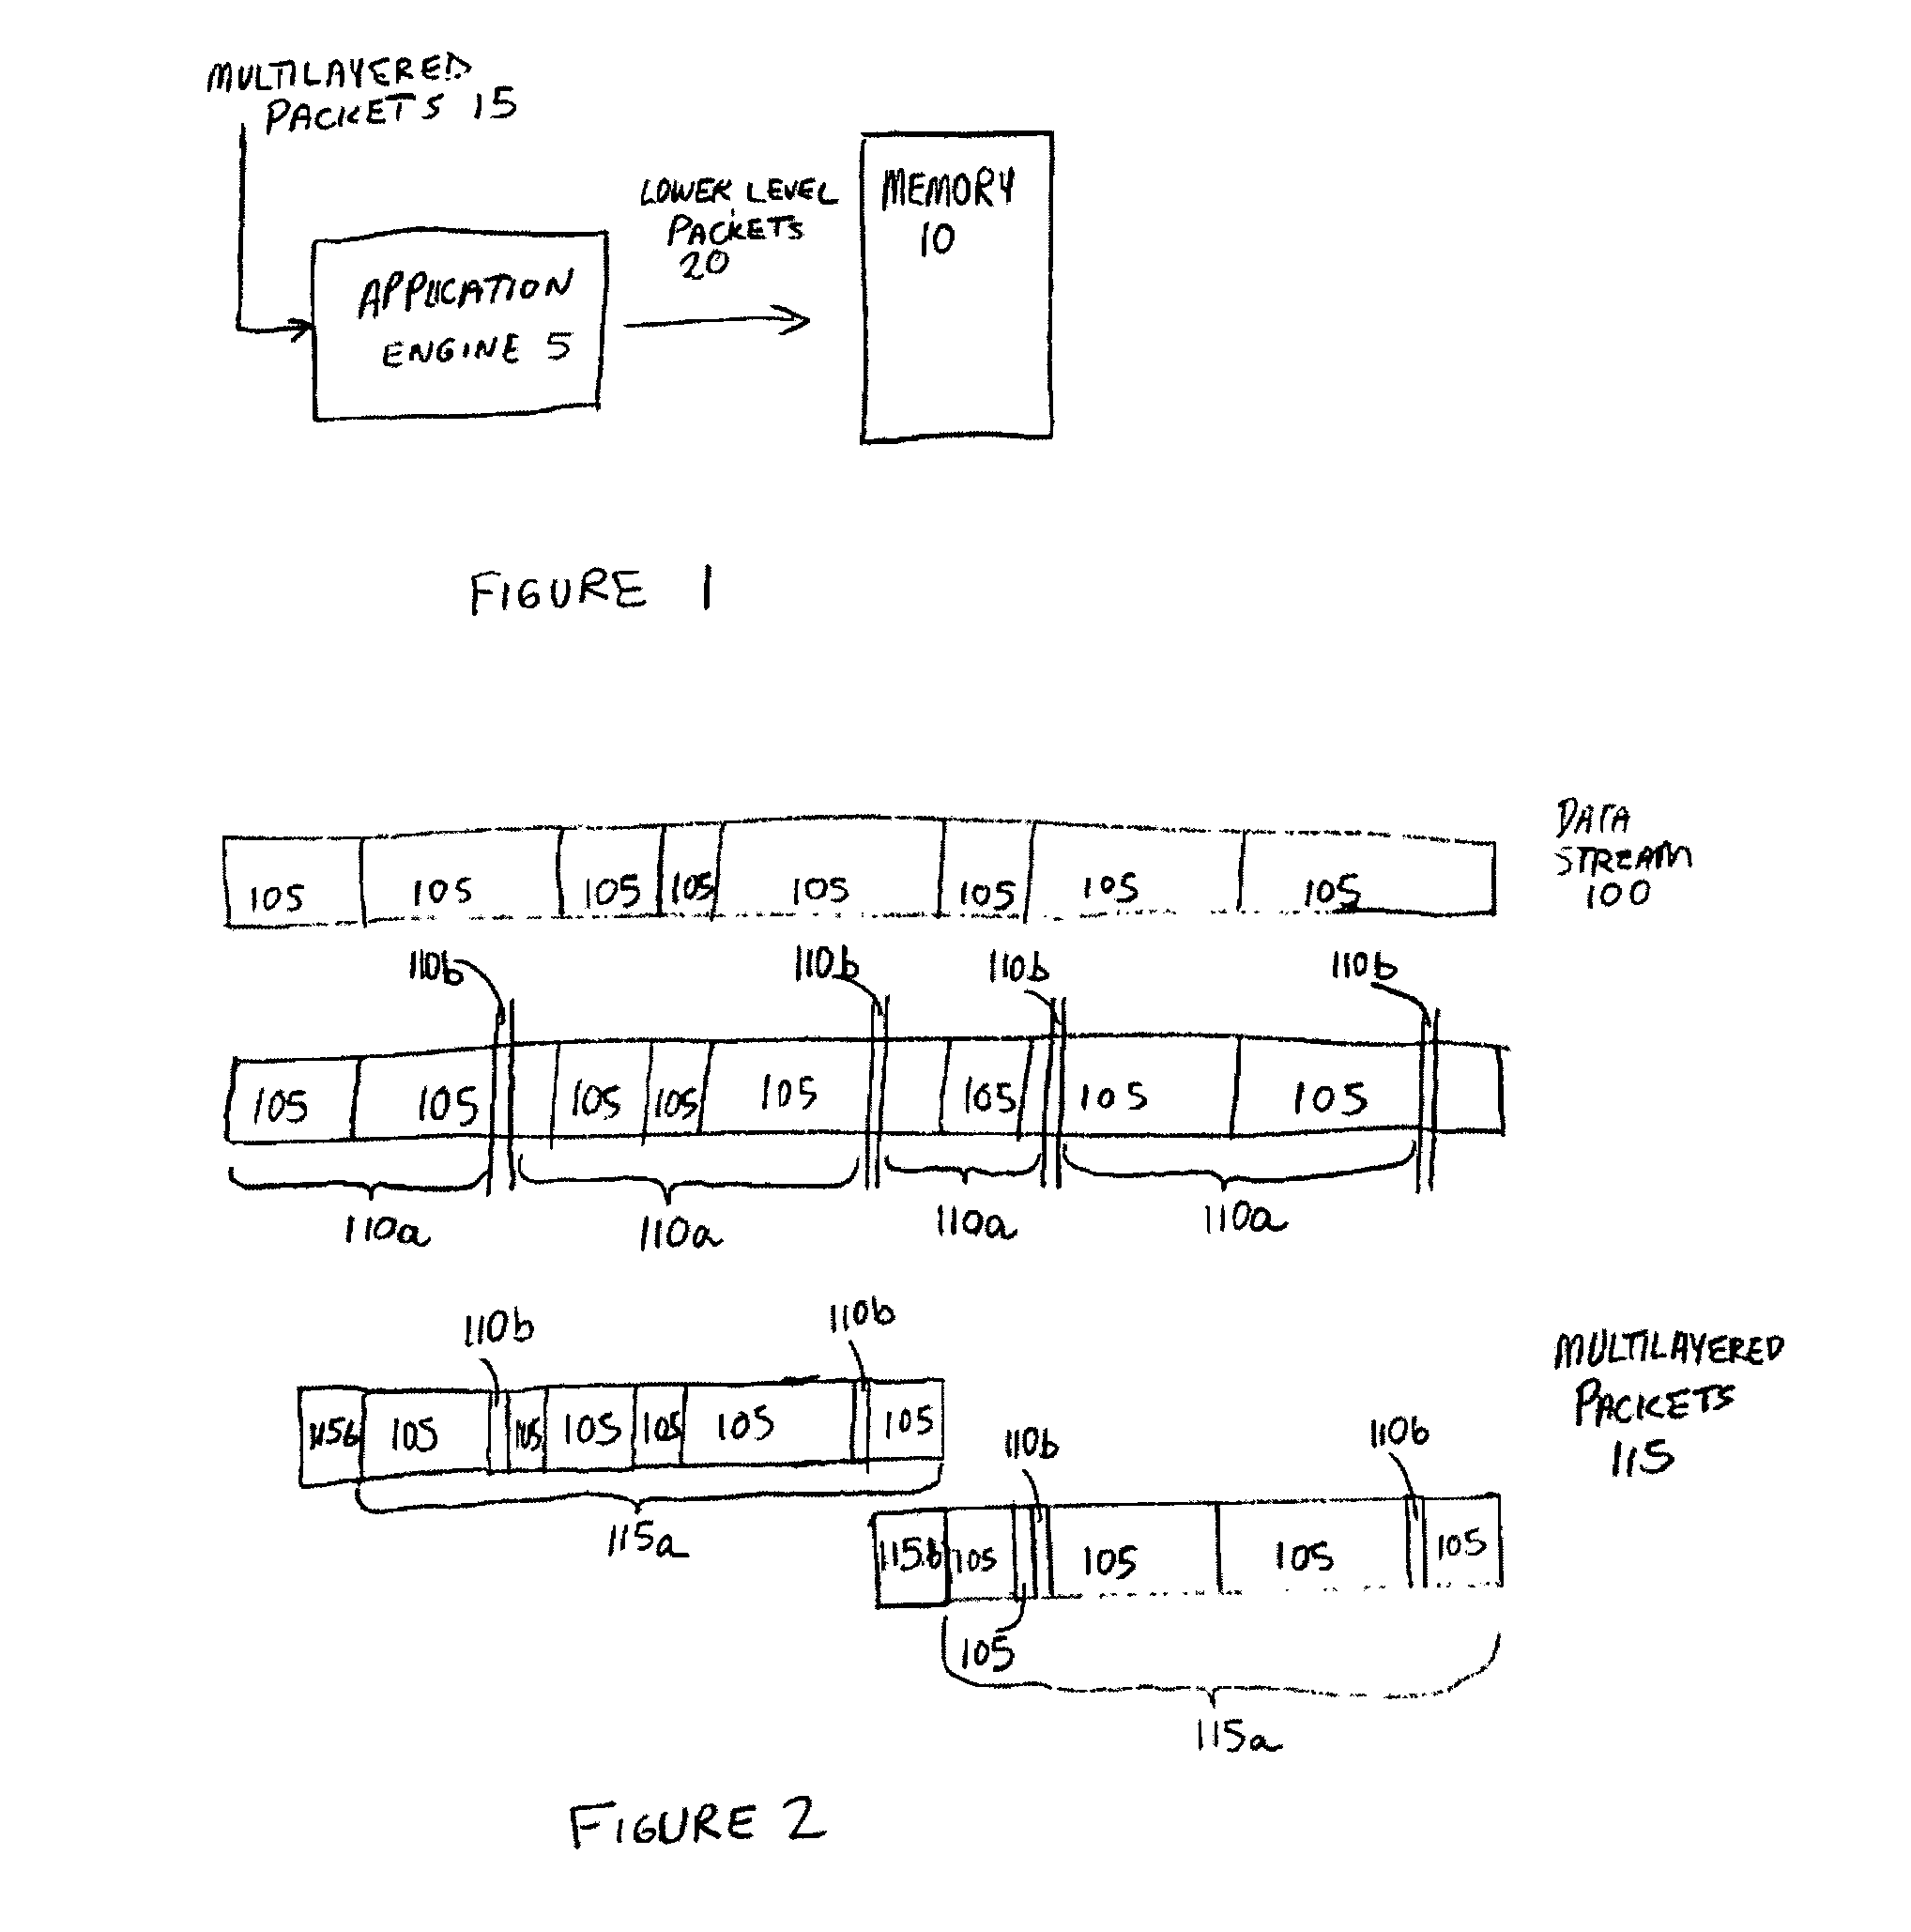 Data alignment of the packetized elementary streams in the coded data buffer for dual decode